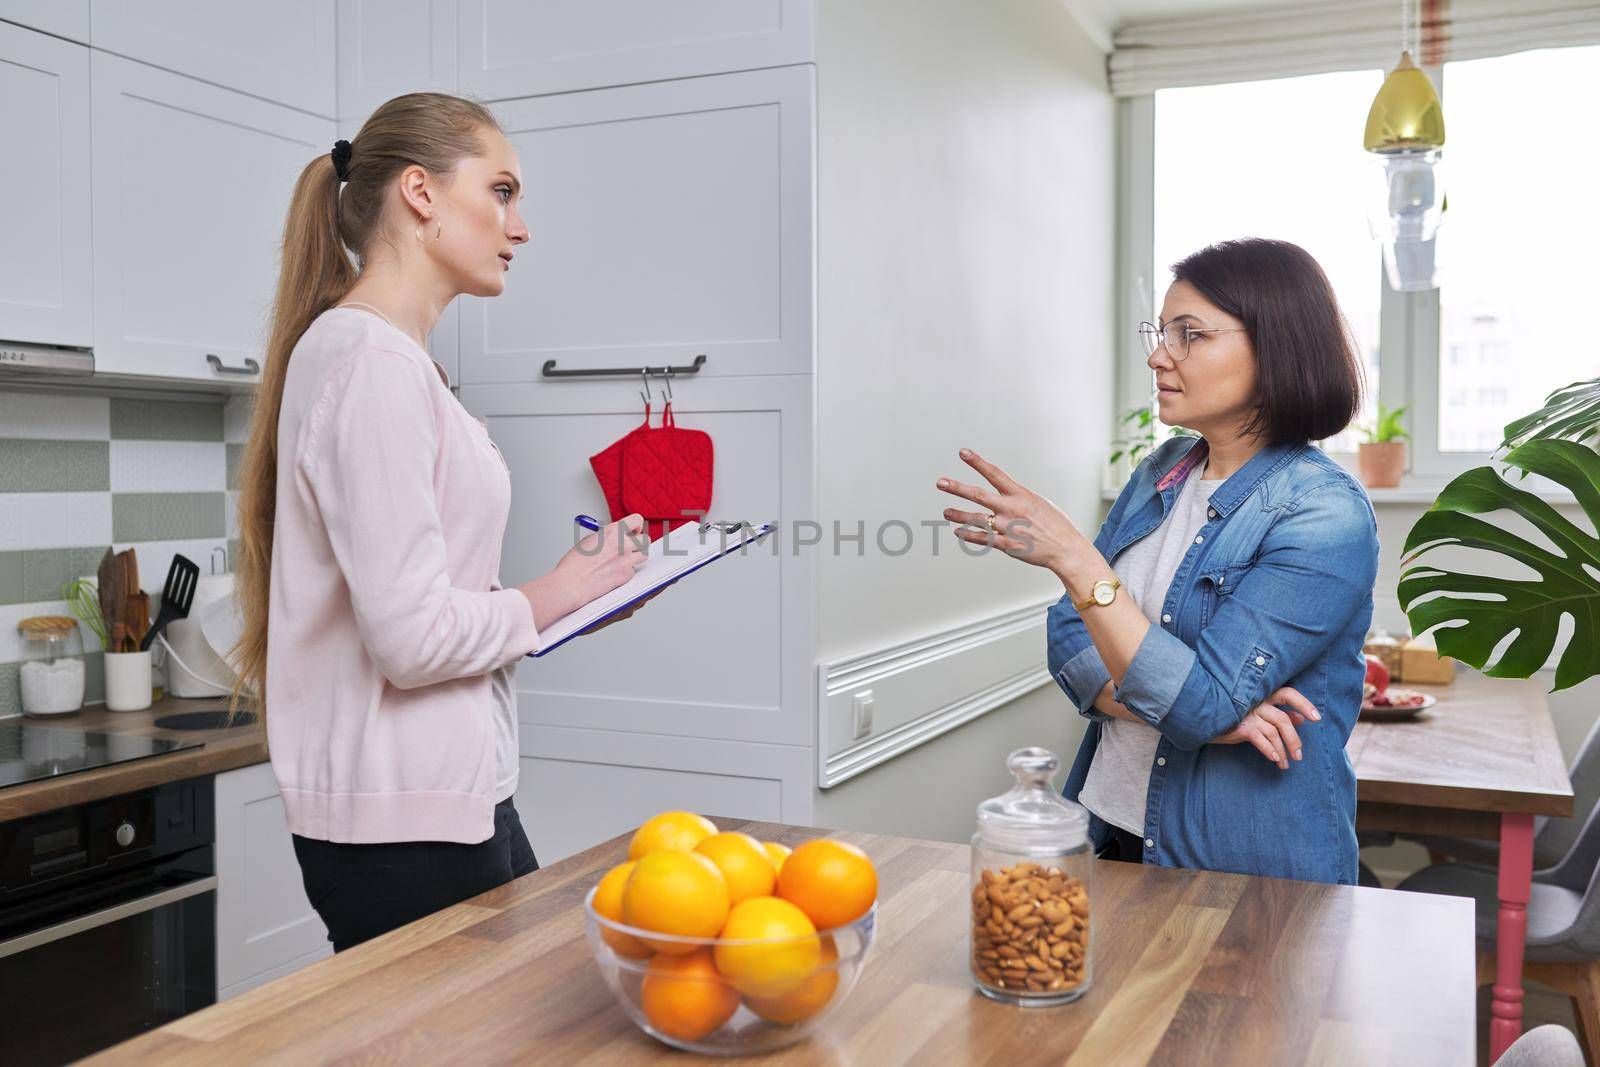 Poll, interview, monitoring, visitor young woman social worker talking and interrogating mature woman housewife, home kitchen interior background